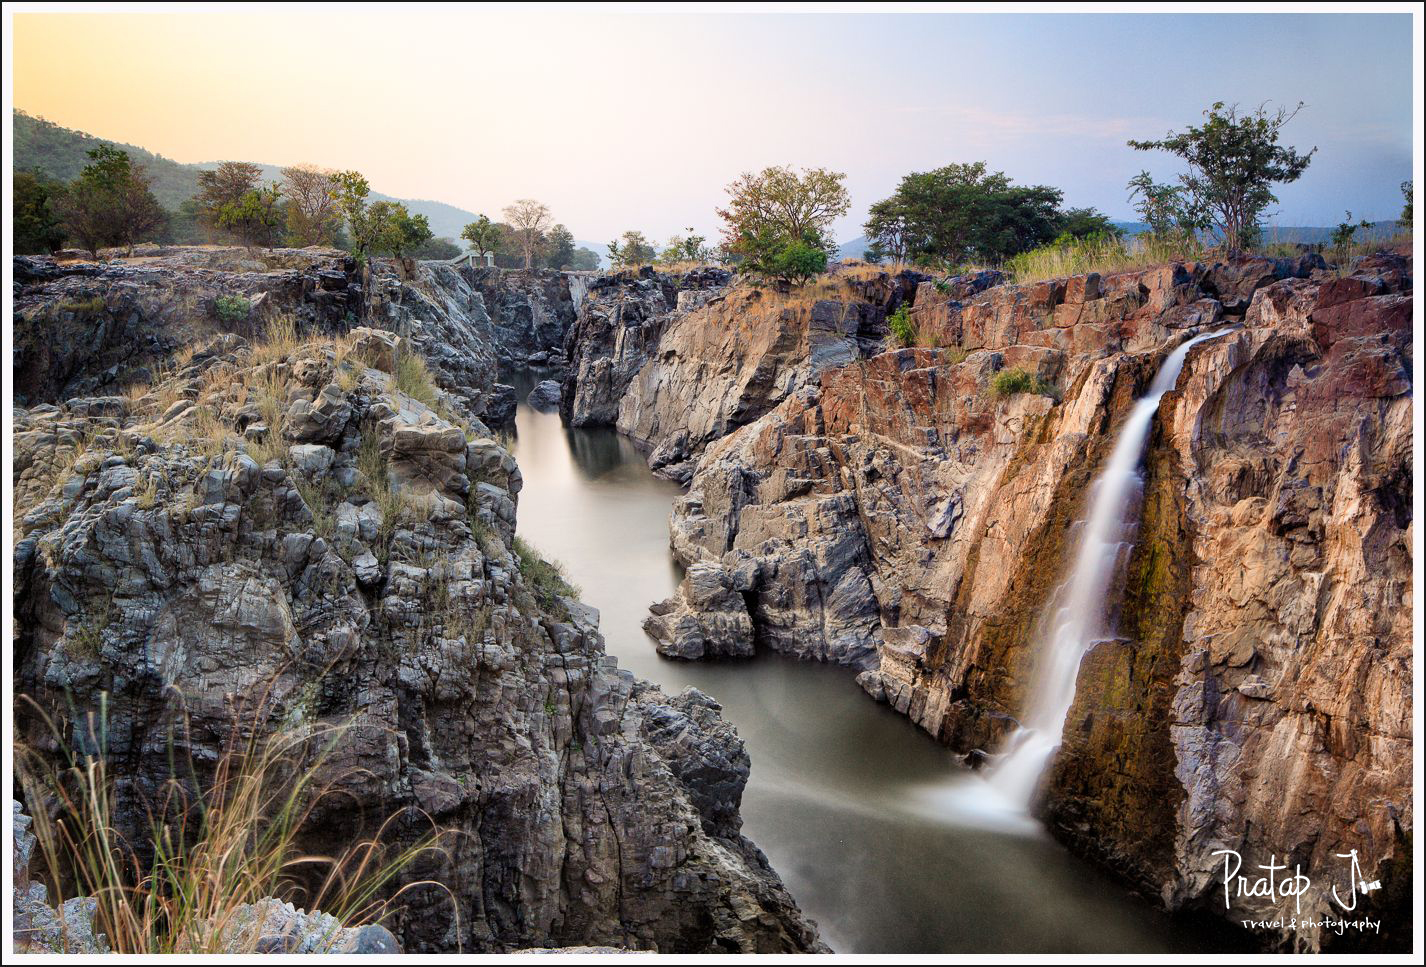 A view of the river Cauvery at Hogenakkal Falls